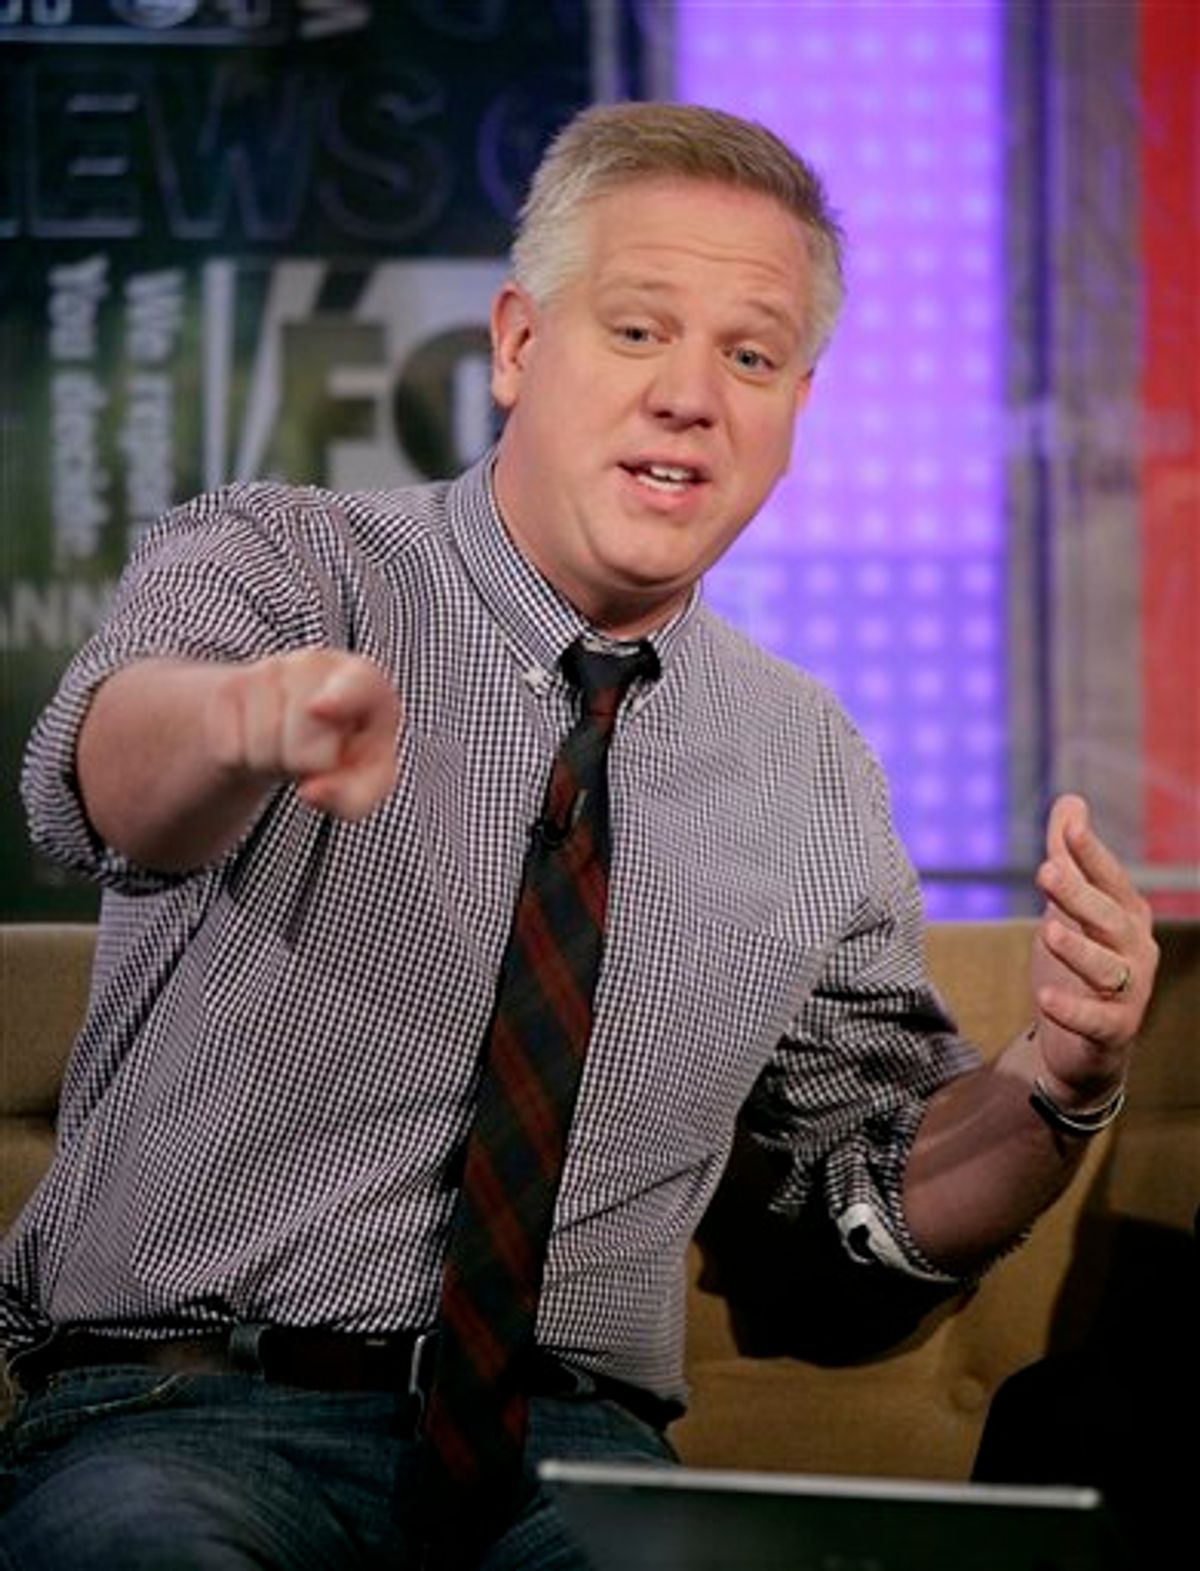 FILE - In this May 18, 2010, file photo, radio and television personality Glenn Beck is interviewed on the "Fox &amp; friends" television show in New York. Beck's rally on the anniversary and at the site of Martin Luther King Jr.'s famous "I Have a Dream" speech is drawing criticism, protests and questions about his intentions. (AP Photo/Richard Drew, File) (AP)